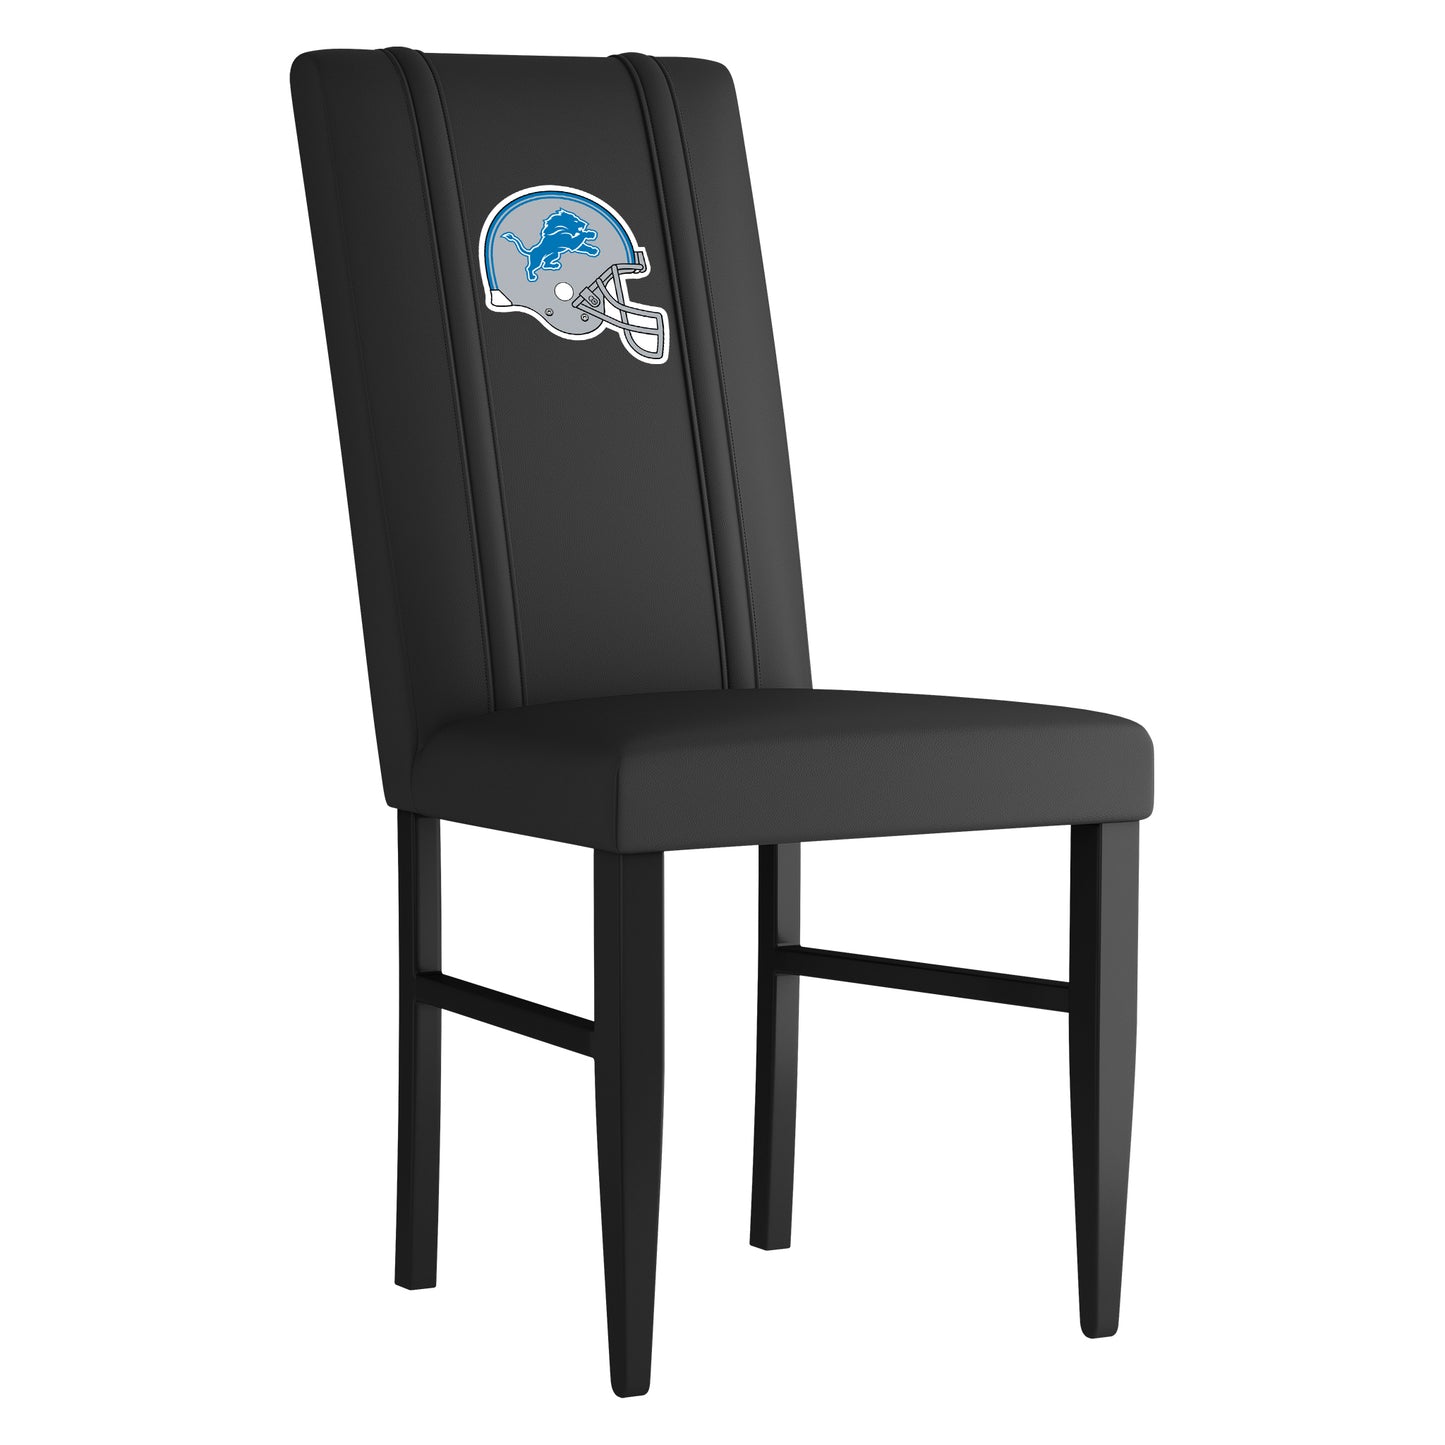 Side Chair 2000 with  Detroit Lions Helmet Logo Set of 2